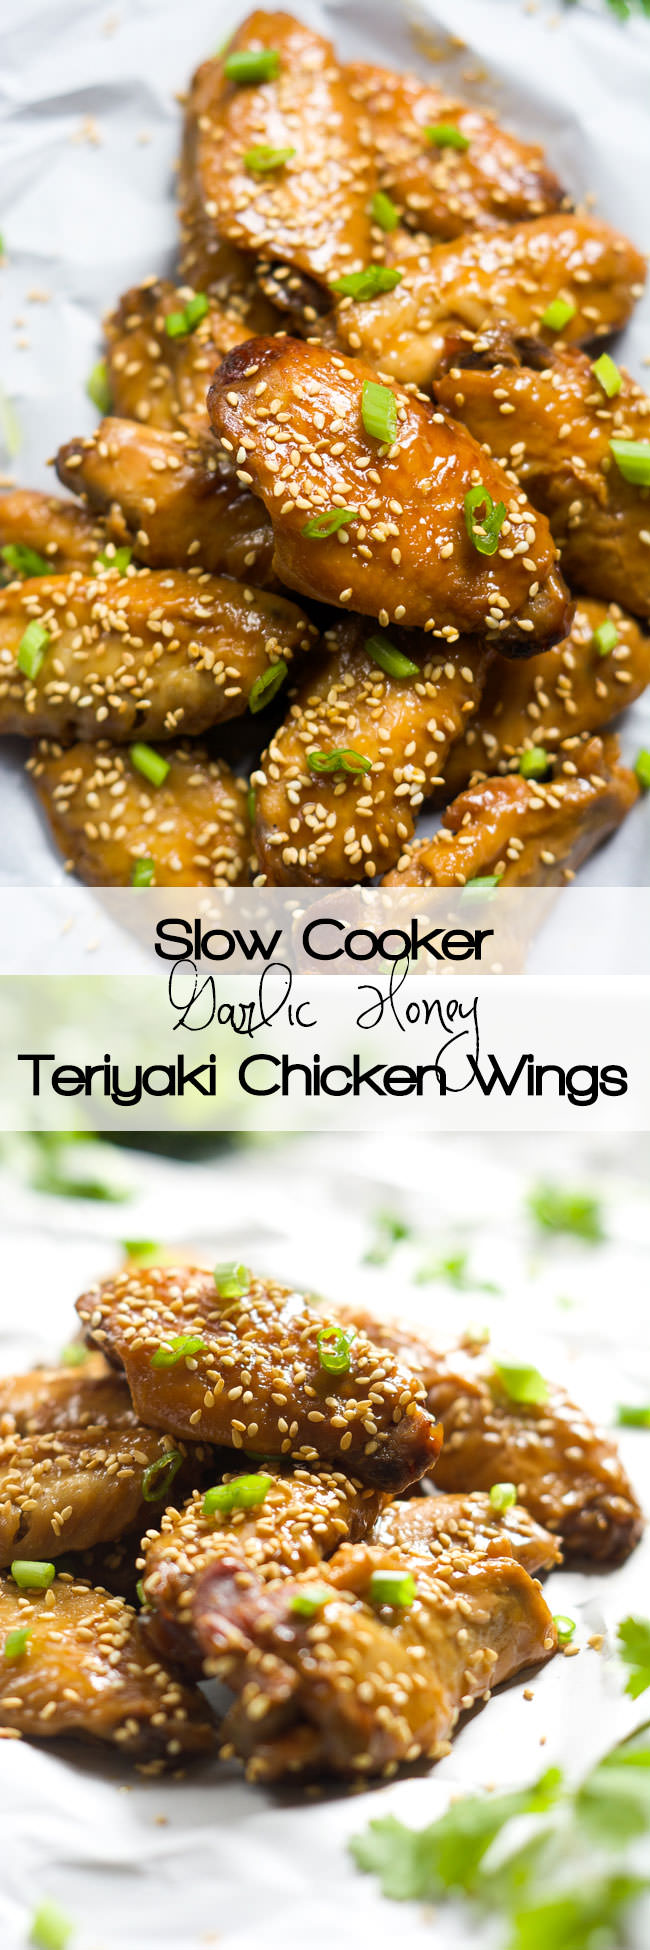 Forget the fryer with these Slow Cooker Garlic Honey Teriyaki Chicken Wings! Filled with Asian flavors of garlic, honey, ginger and soy sauce, these wings are the perfect appetizer or light dinner! 